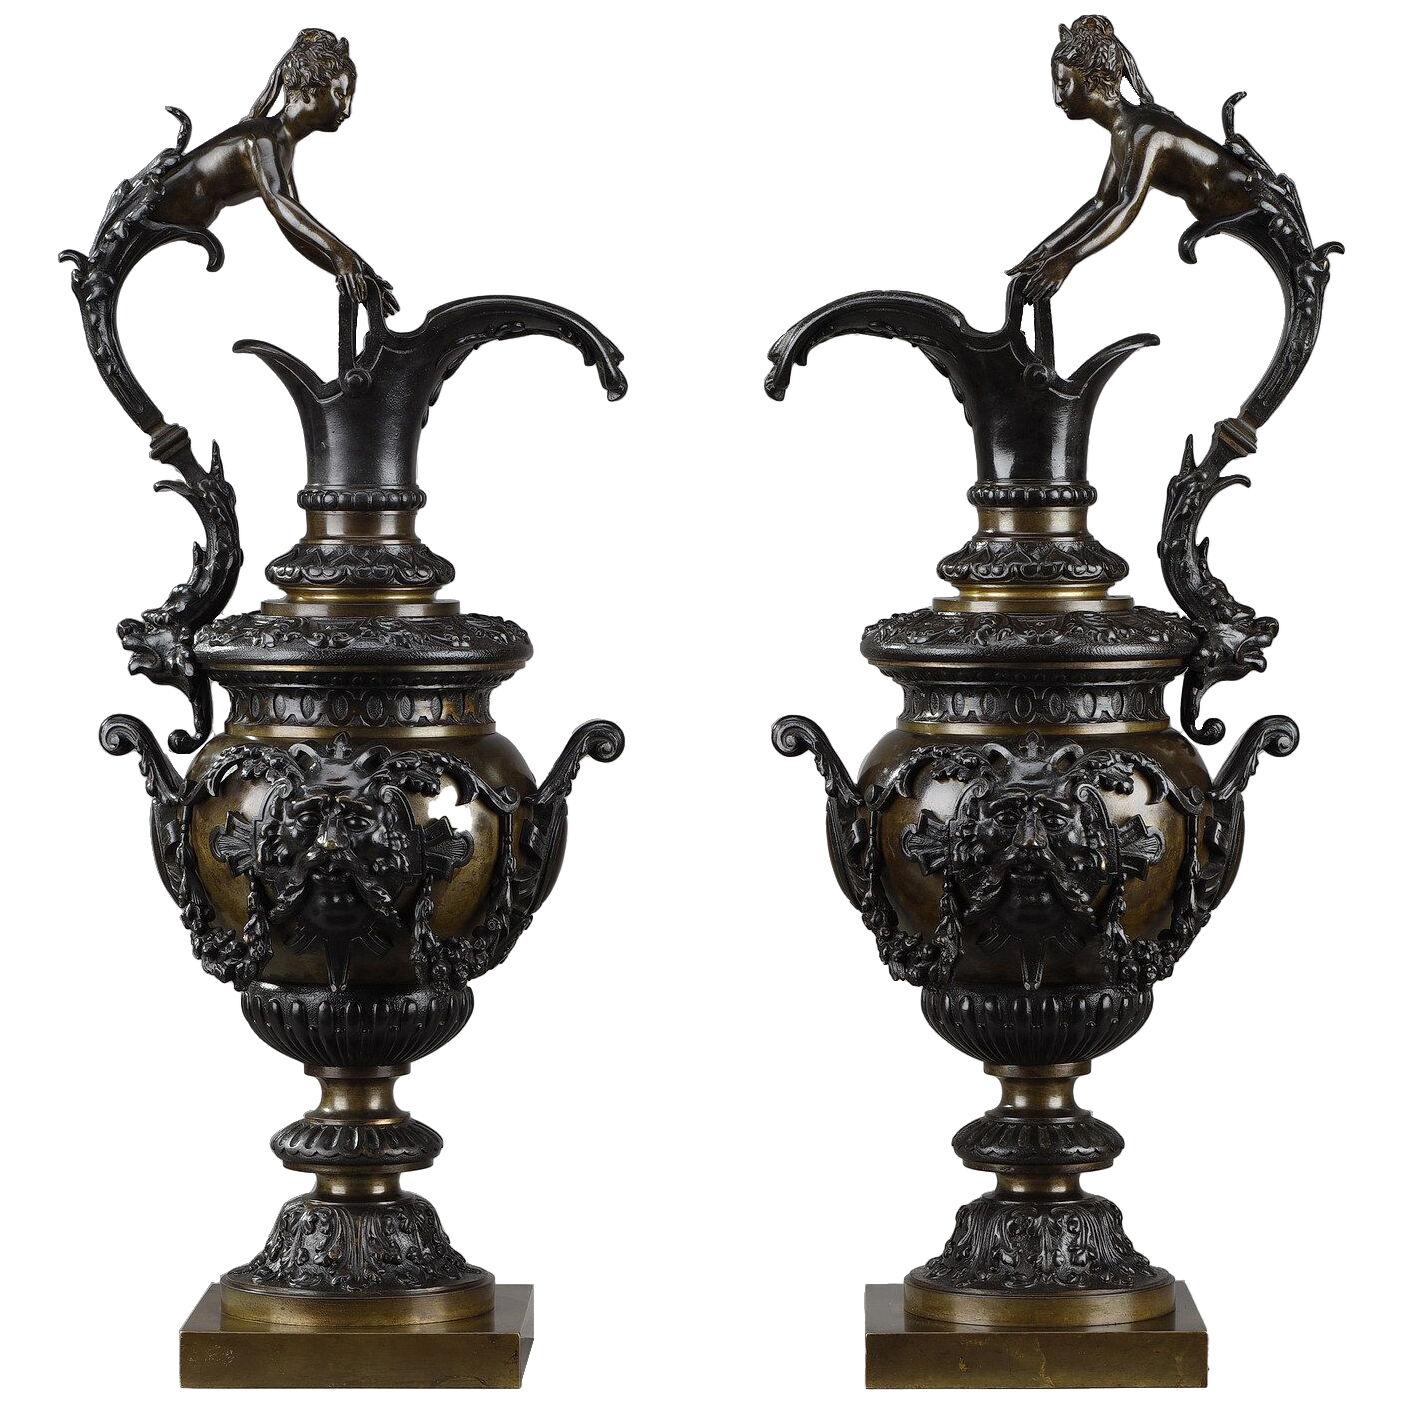 Pair of decorative bronze ewers in the Renaissance style